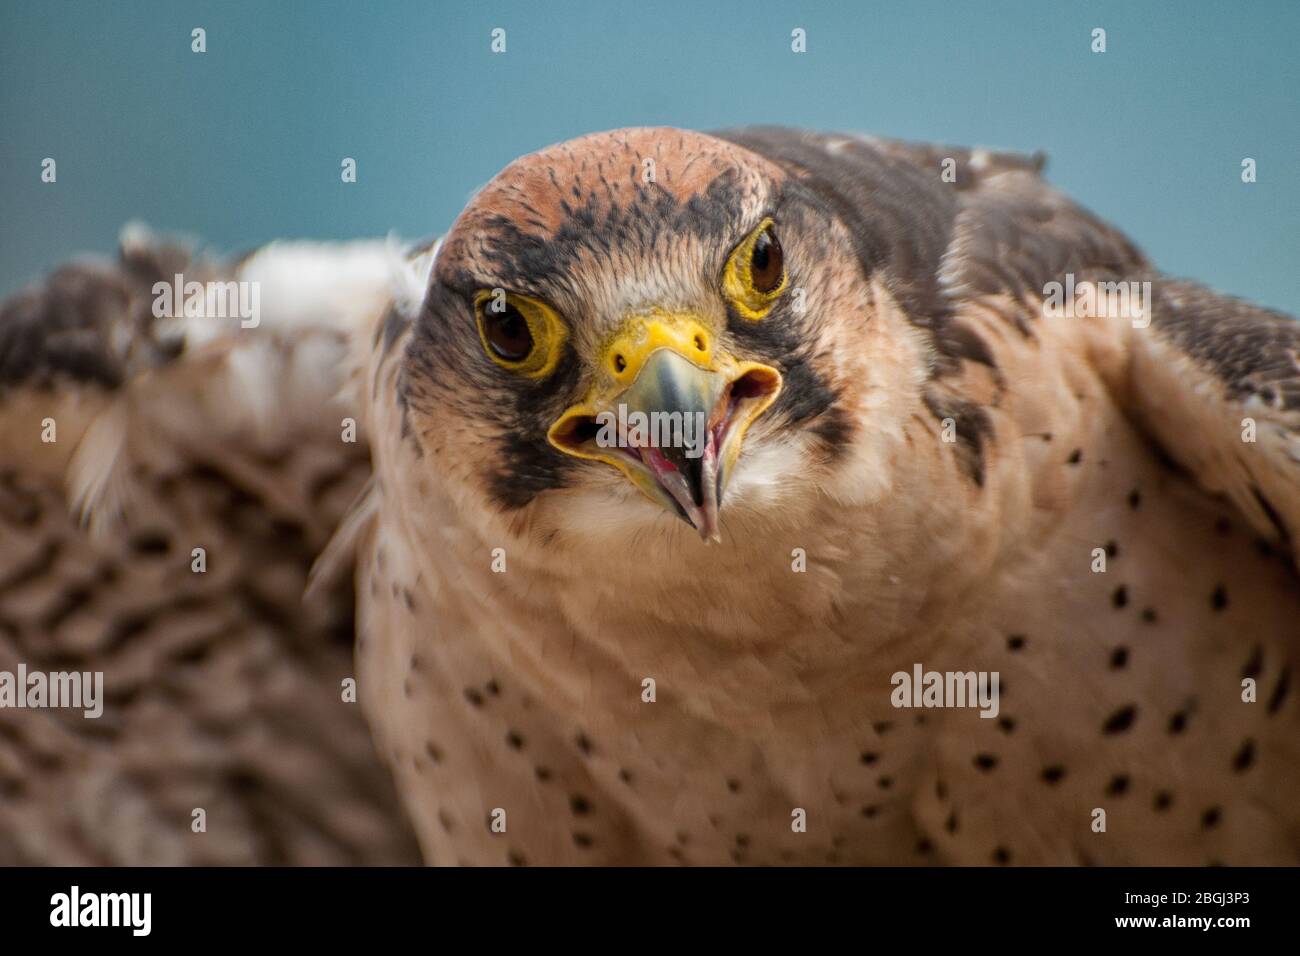 Close-up of the head of a Lanner falcon Stock Photo